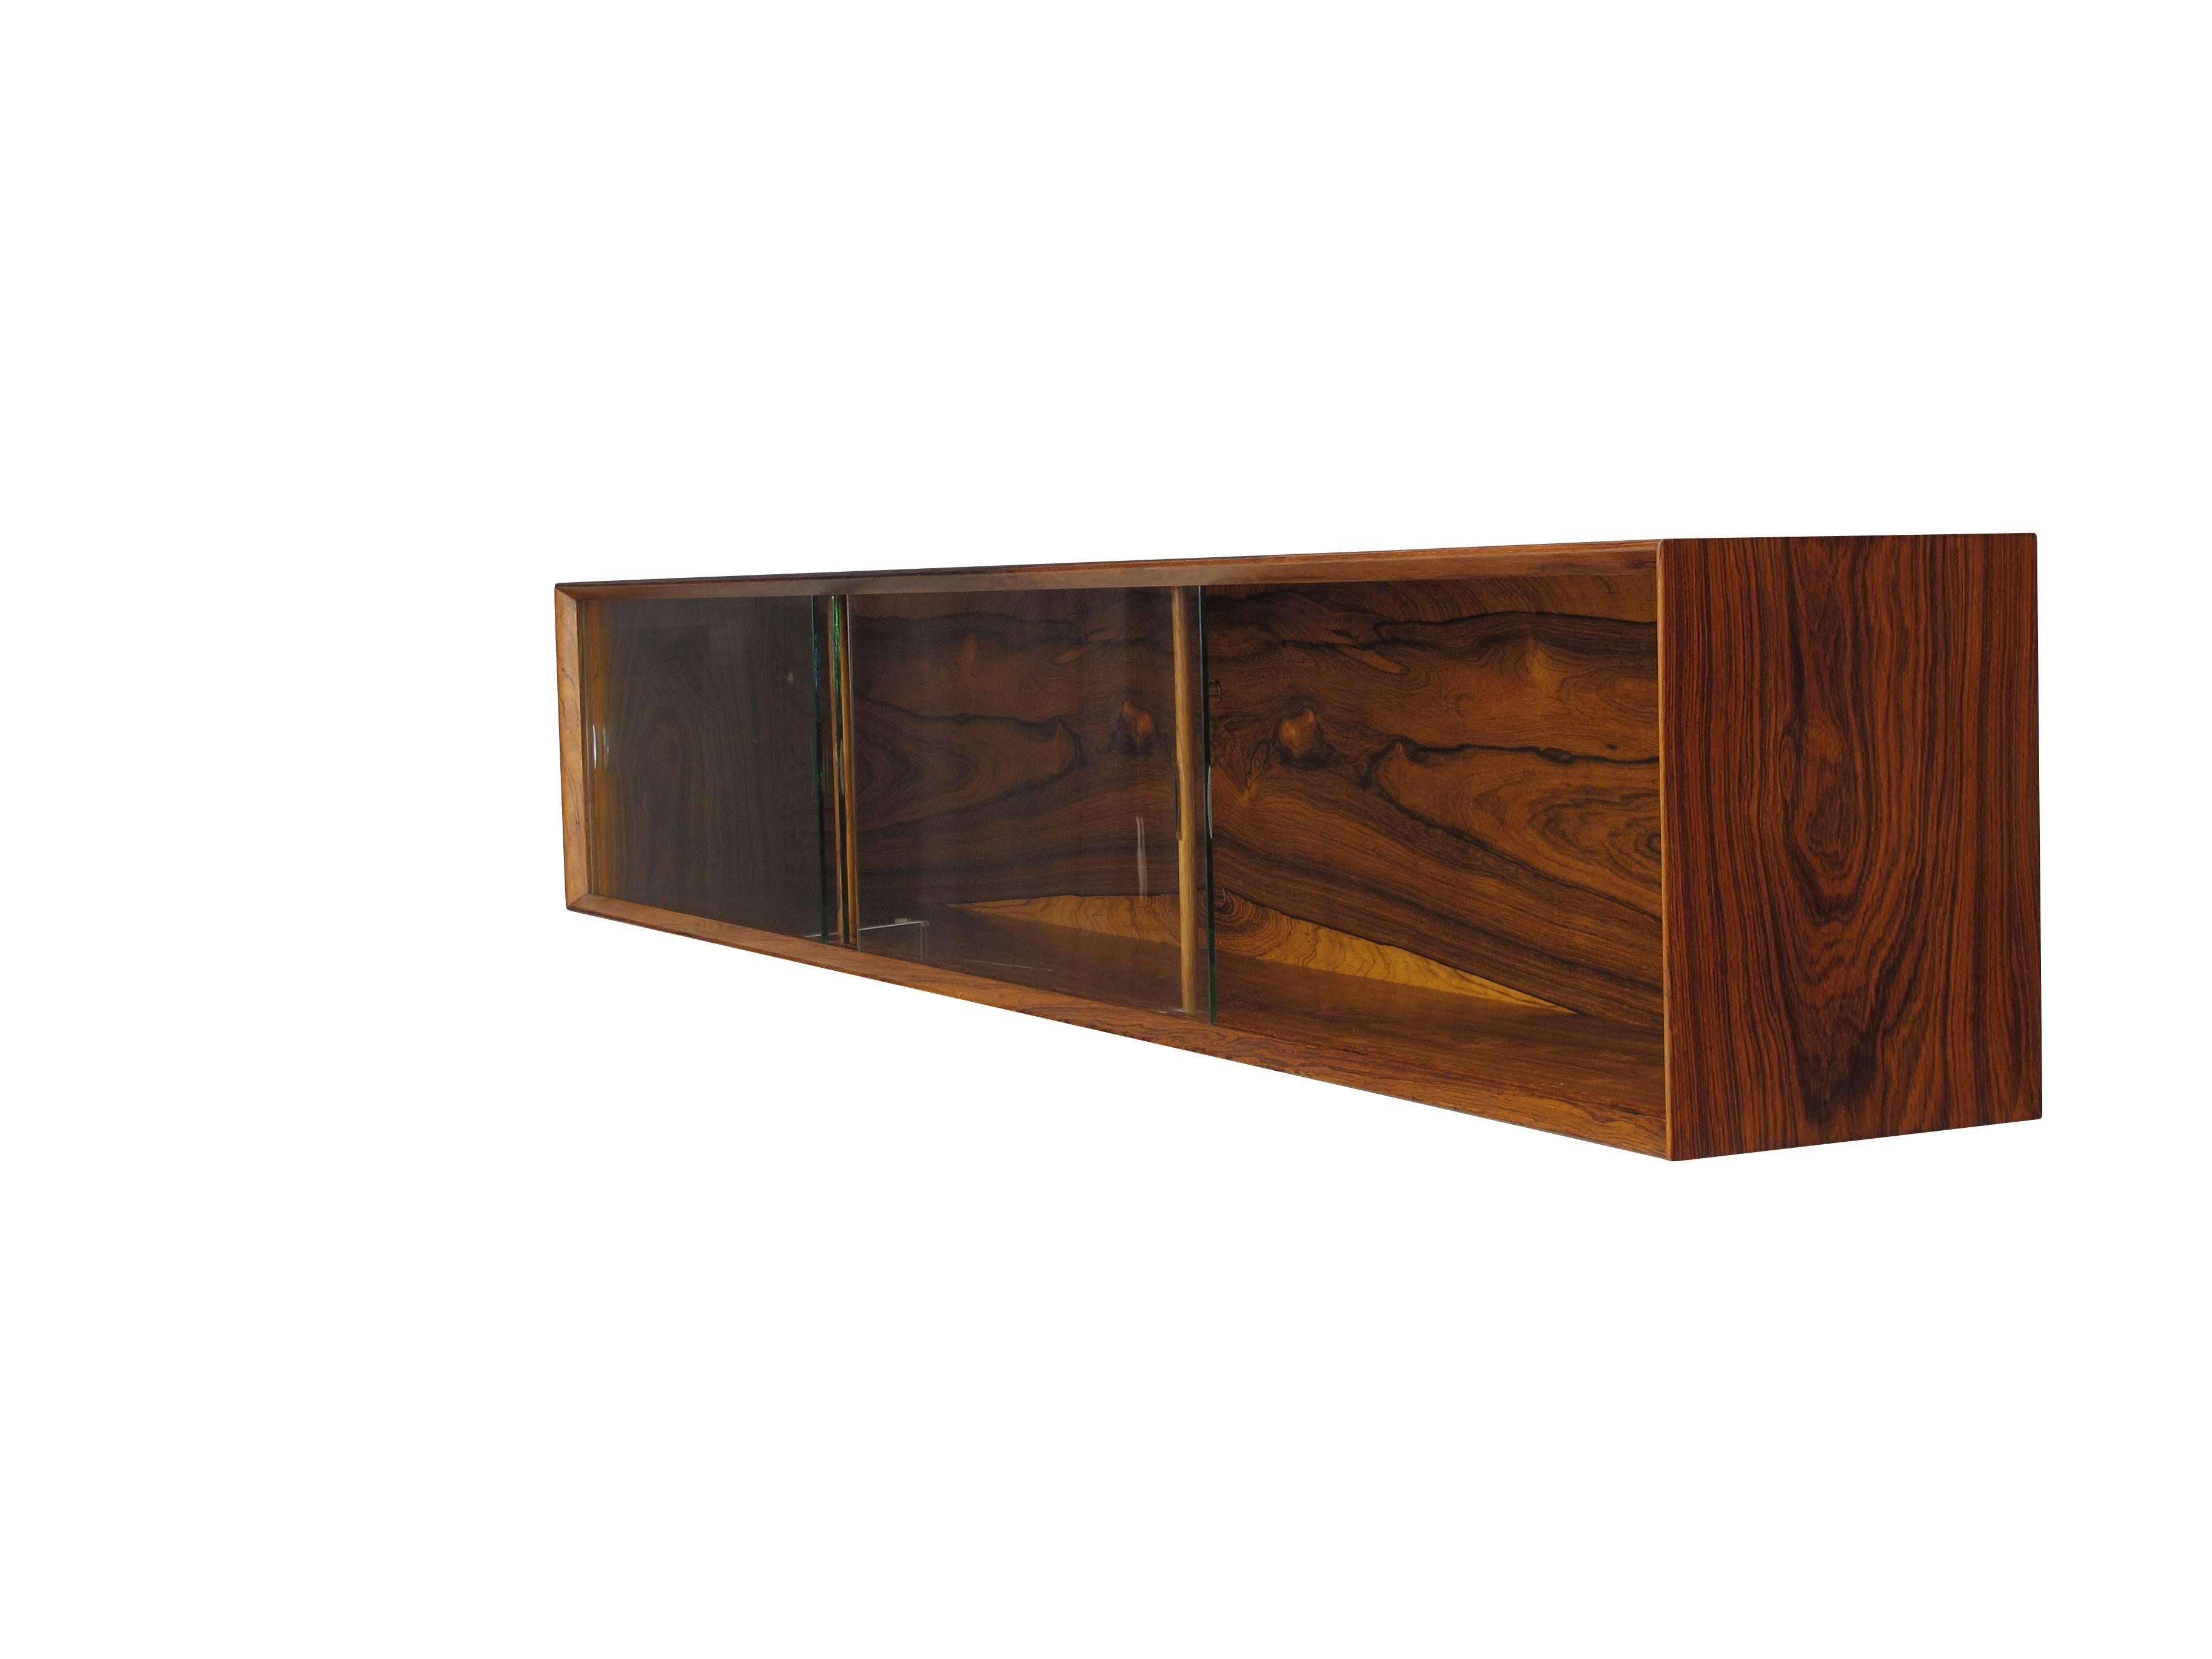 Finely crafted Midcentury rosewood wall mount credenza with mitered edges and three sliding glass doors. Additional images available upon request.